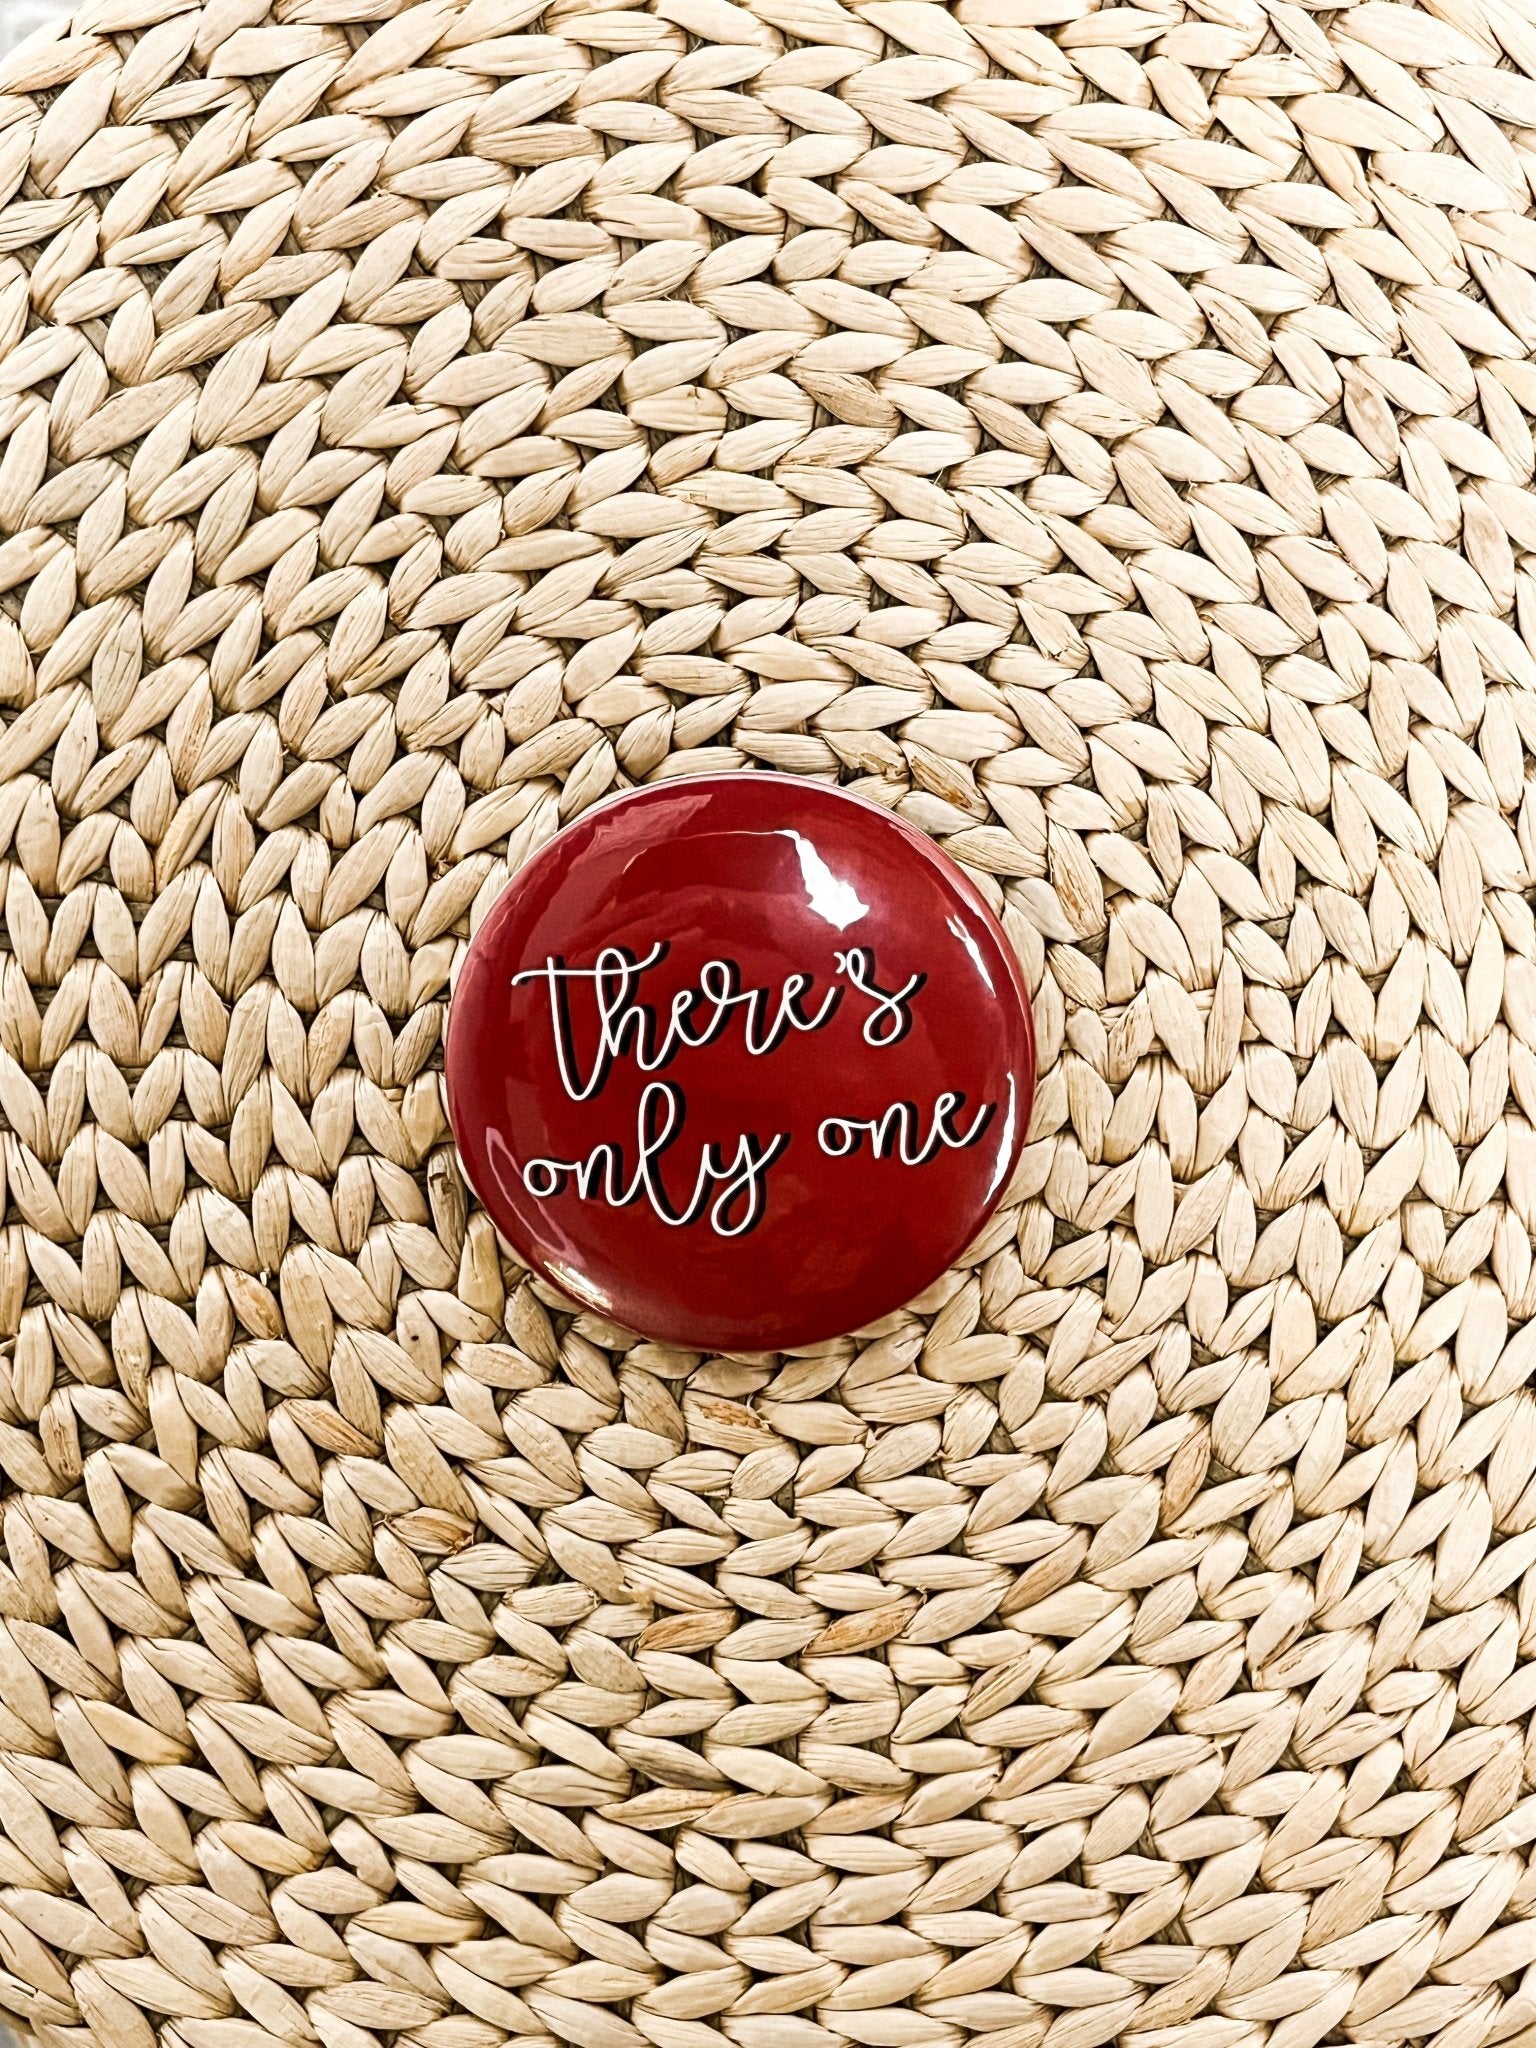 There's only one 2.25 inch game day button crimson